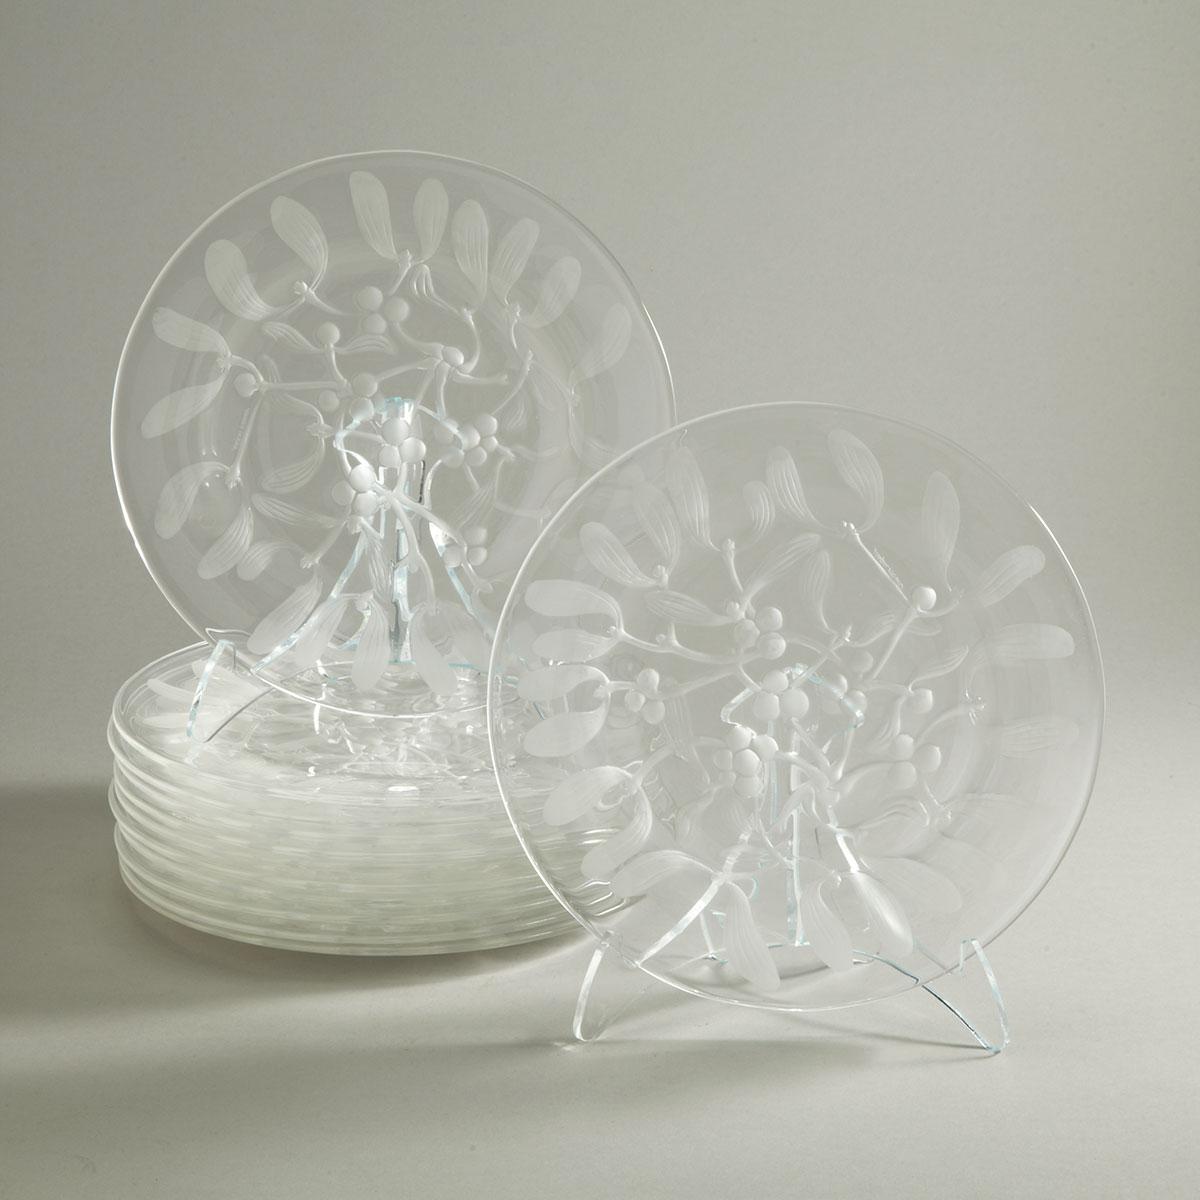 ‘Gui’, Twelve Lalique Moulded and Partly Frosted Glass Plates, post-1945